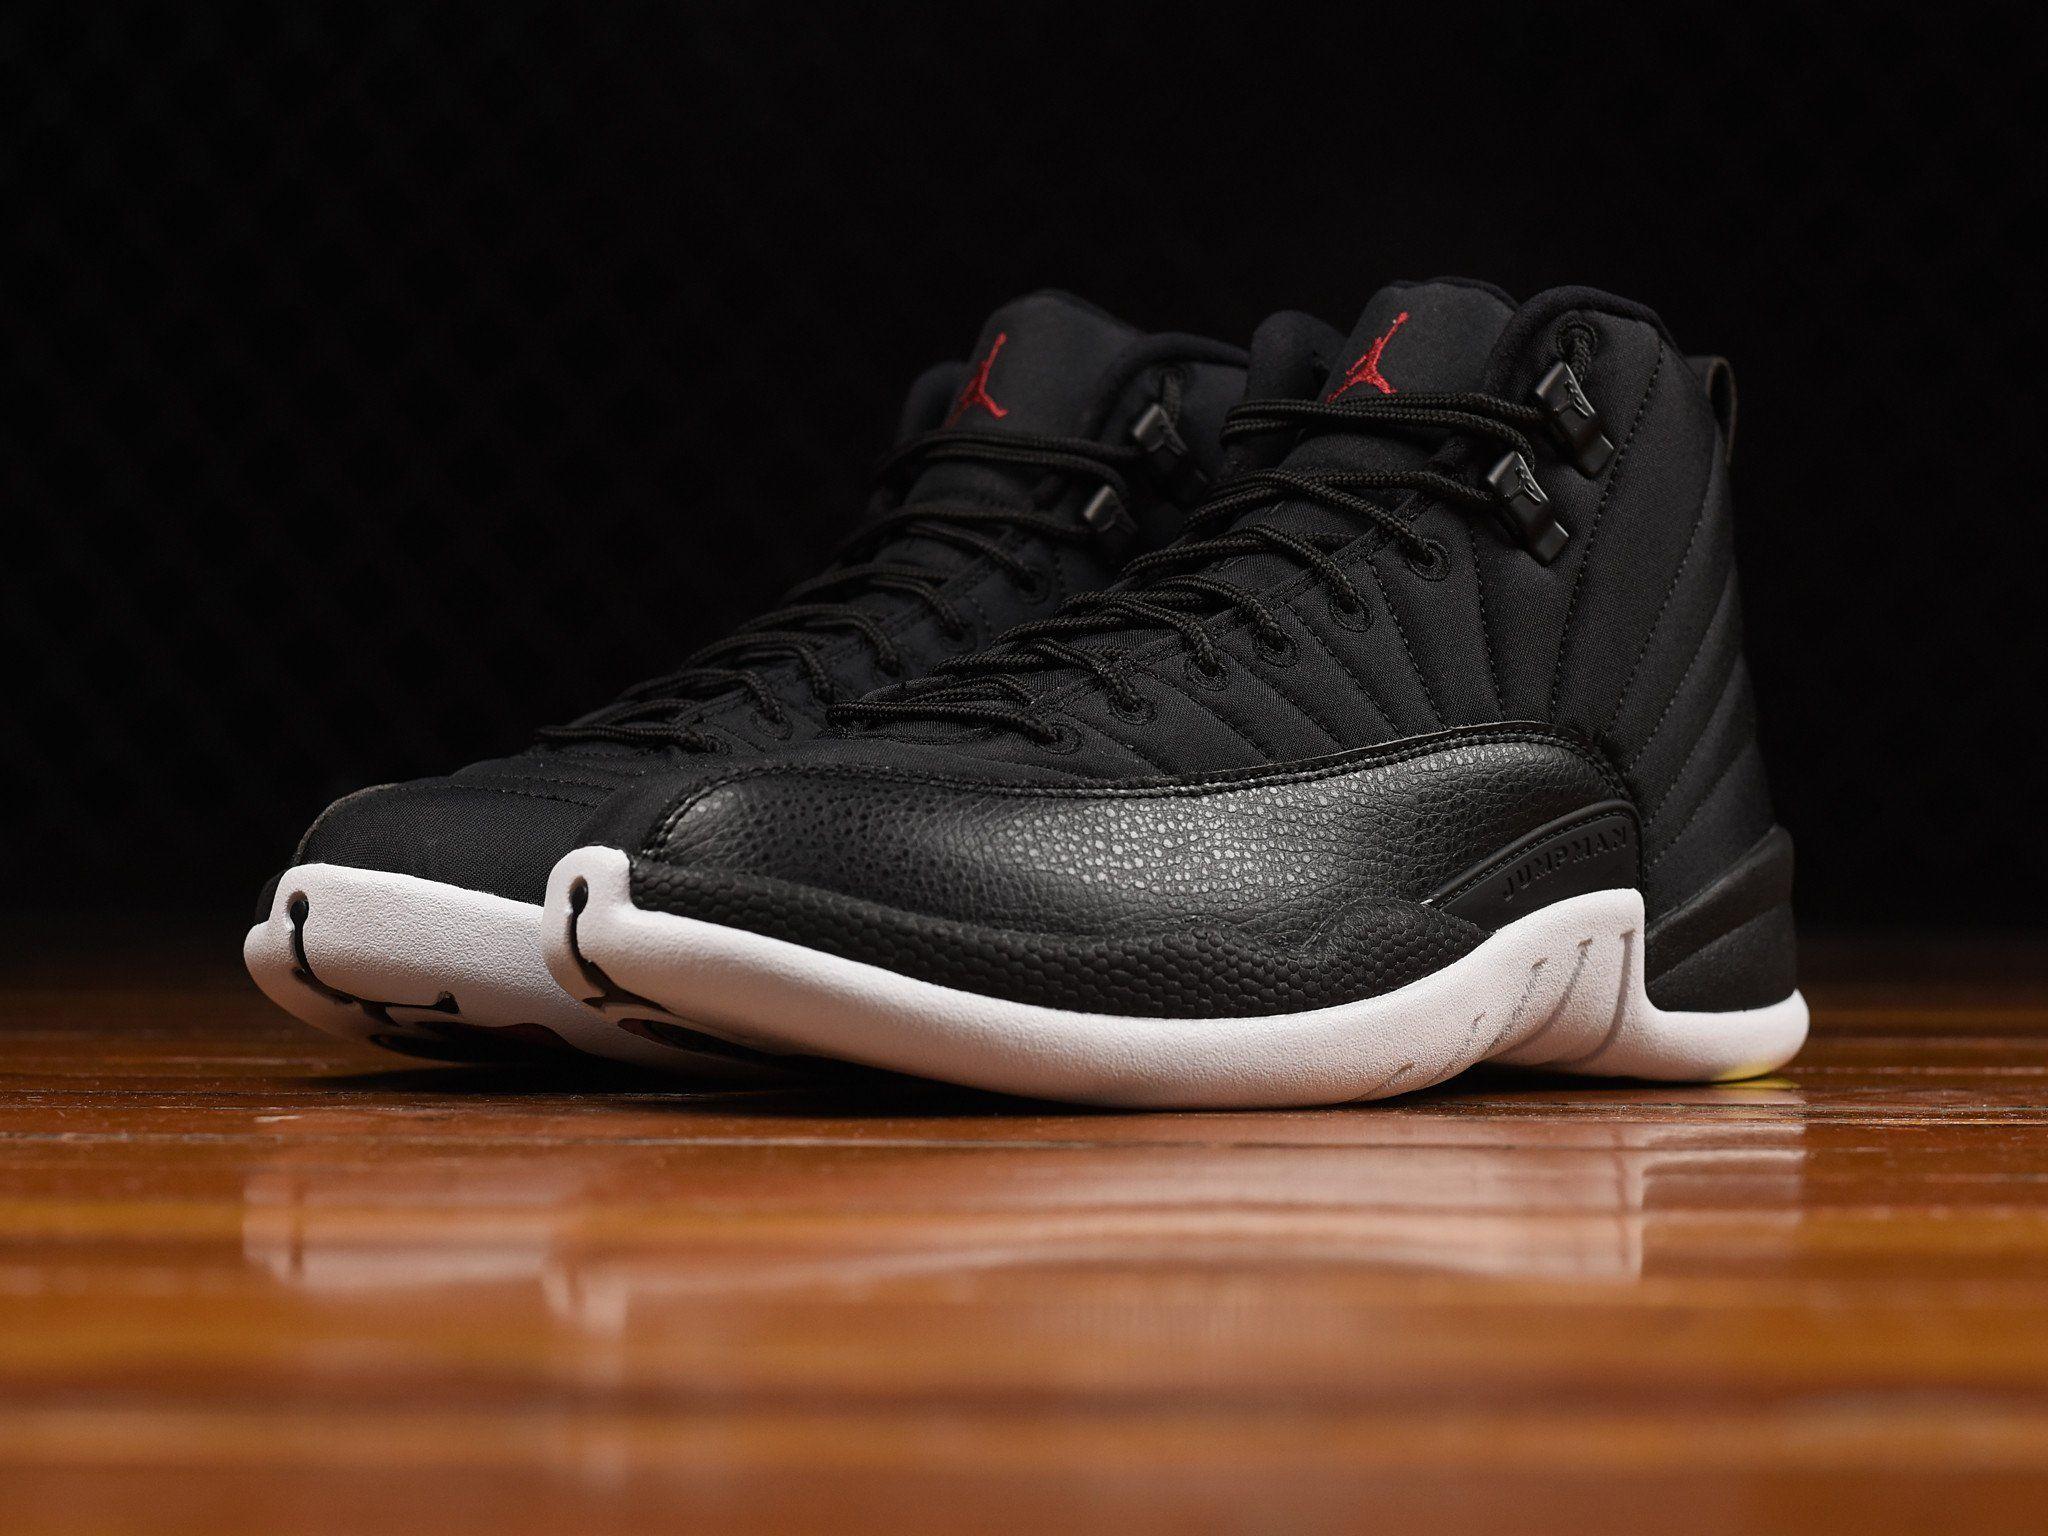 Are You Looking Forward To The Air Jordan 12 Black Nylon This